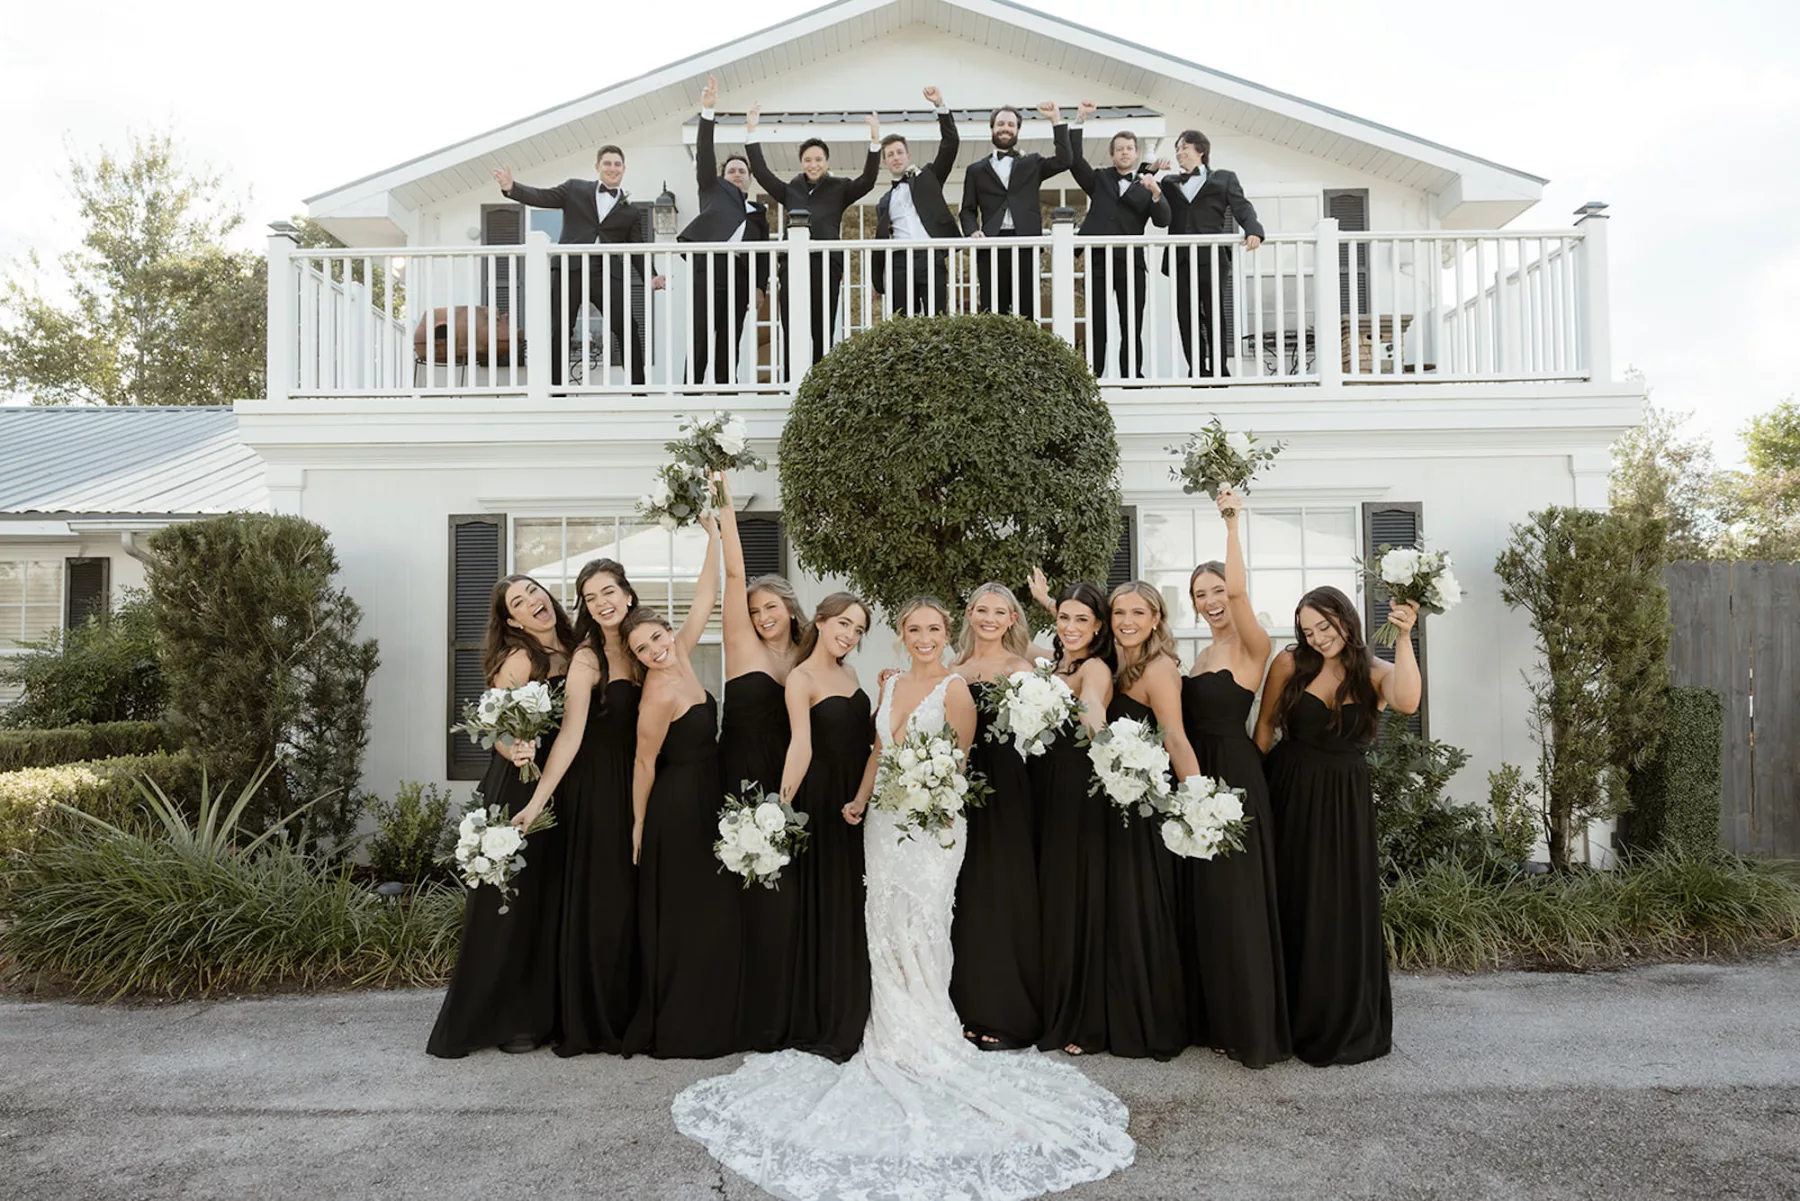 Matching Black Bridesmaid Dresses and Groomsmen Suits Wedding Party Attire Ideas | Central Florida Hair and Makeup Artist Femme Akoi Beauty Studio | Photographer and Videographer Evoke Photo and Film